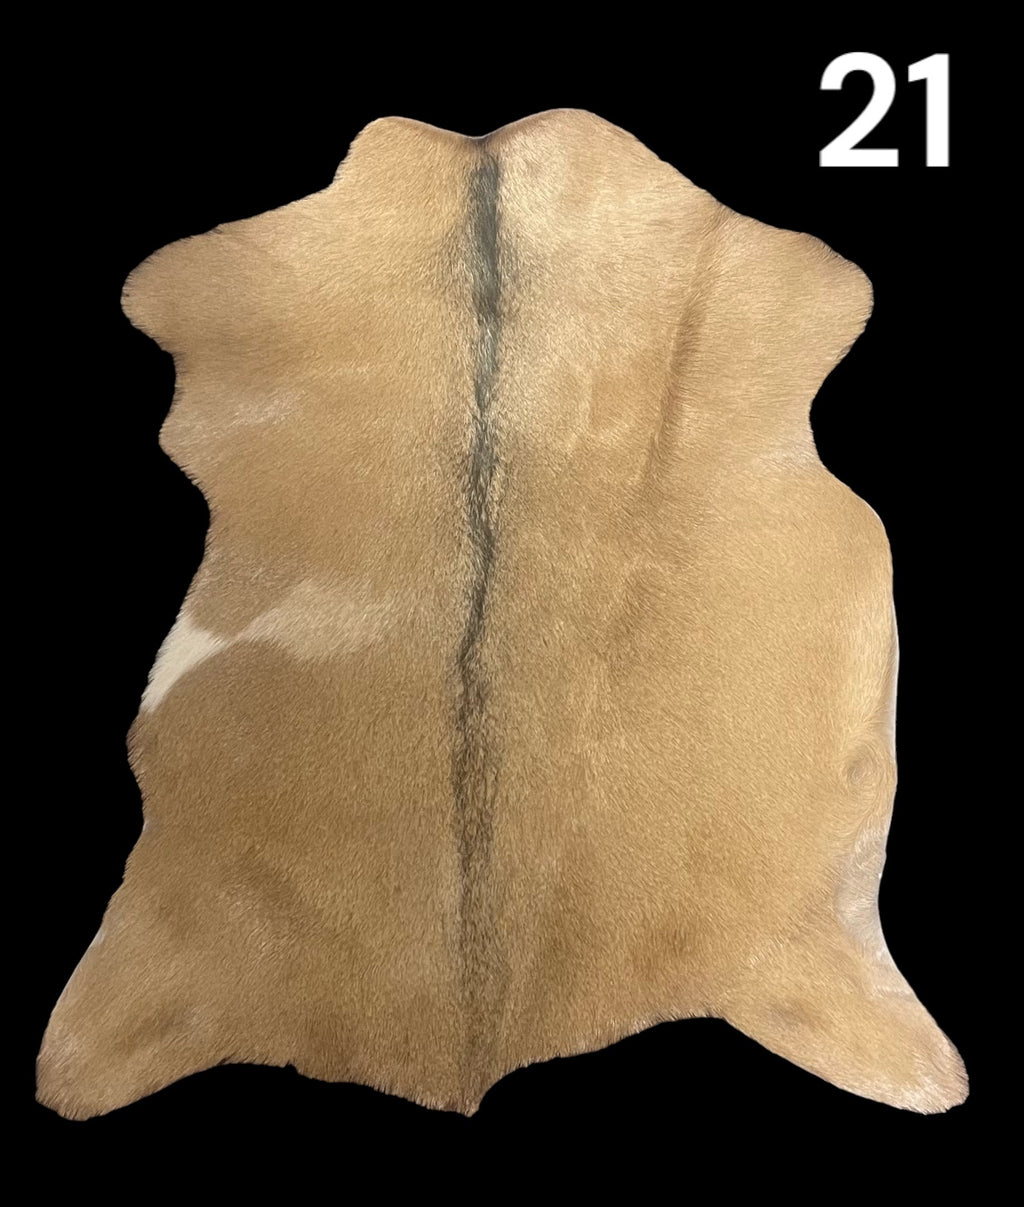 Natural Hair-On Goat Hide : Perfect as a Rug or Throw Also for Making Bags & Accessories (21)